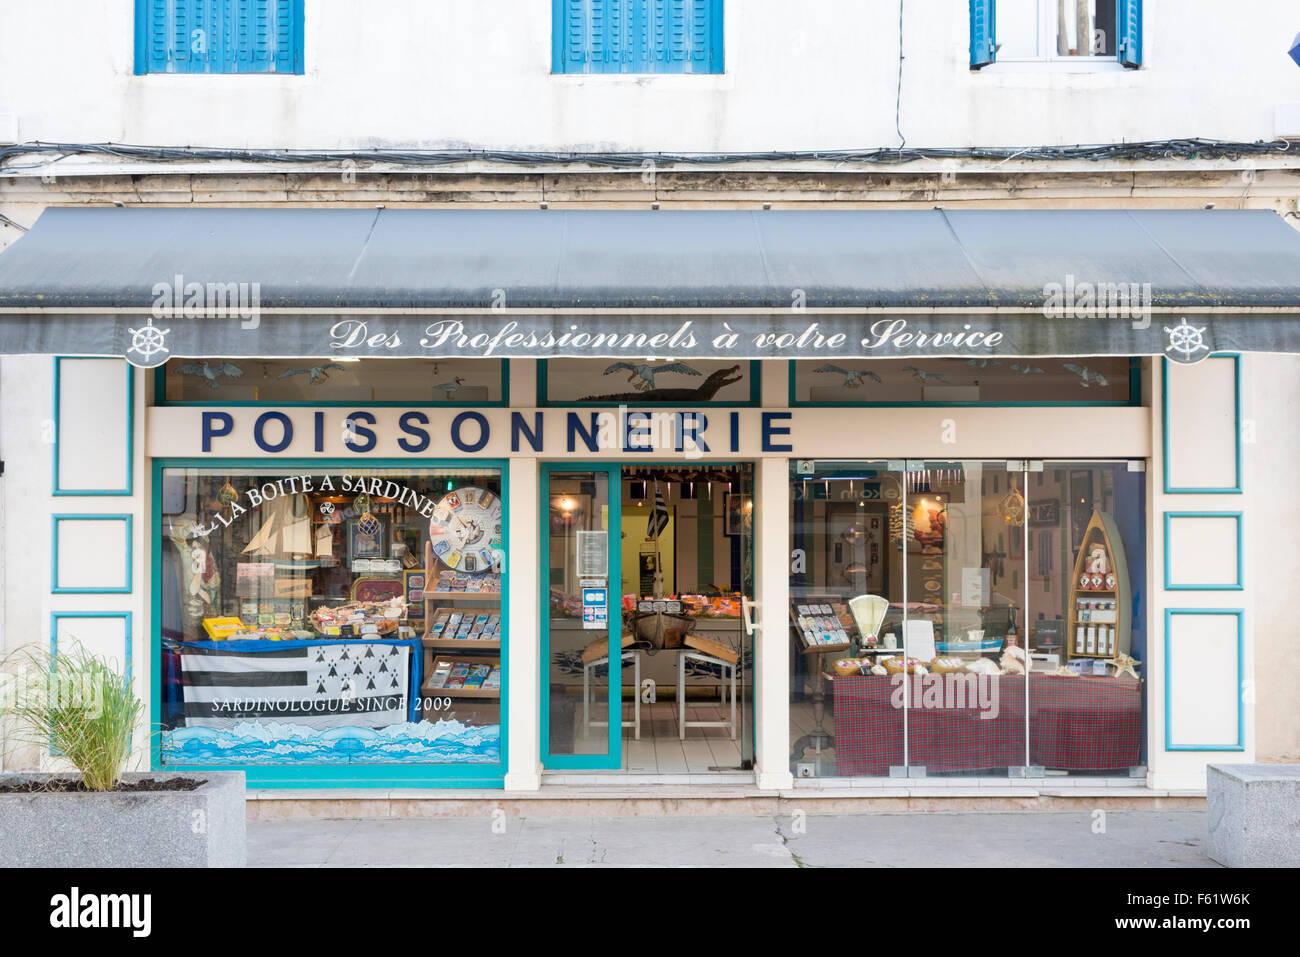 A Poissonnerie or french fishmonger shop in Chagny France Stock Photo